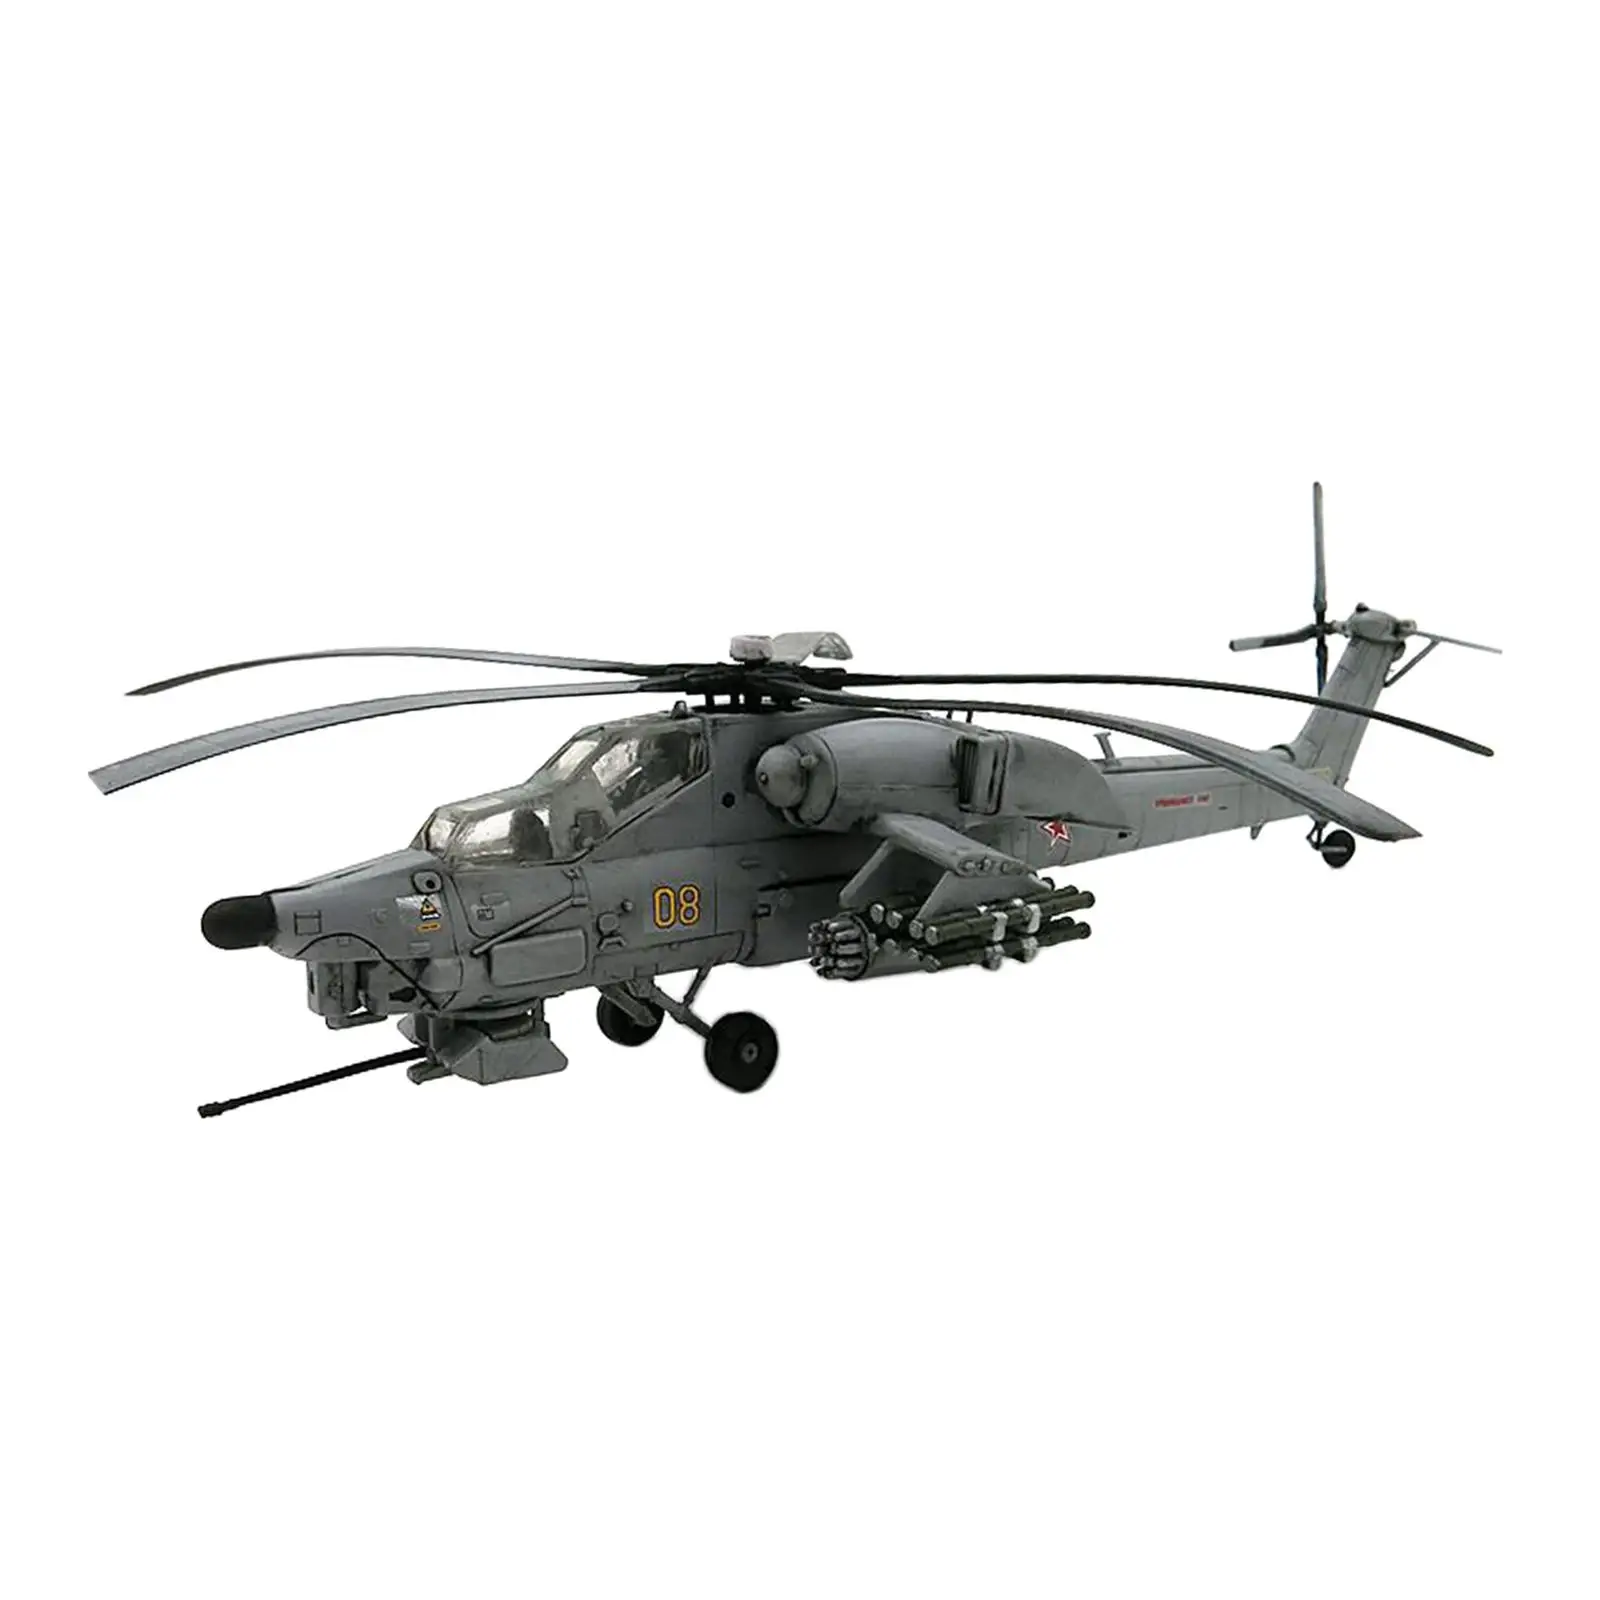 1/72 Scale Mi 28 Havoc Anti Tank Helicopter Model - Realistic Assembly Kit for Aviation Enthusiasts